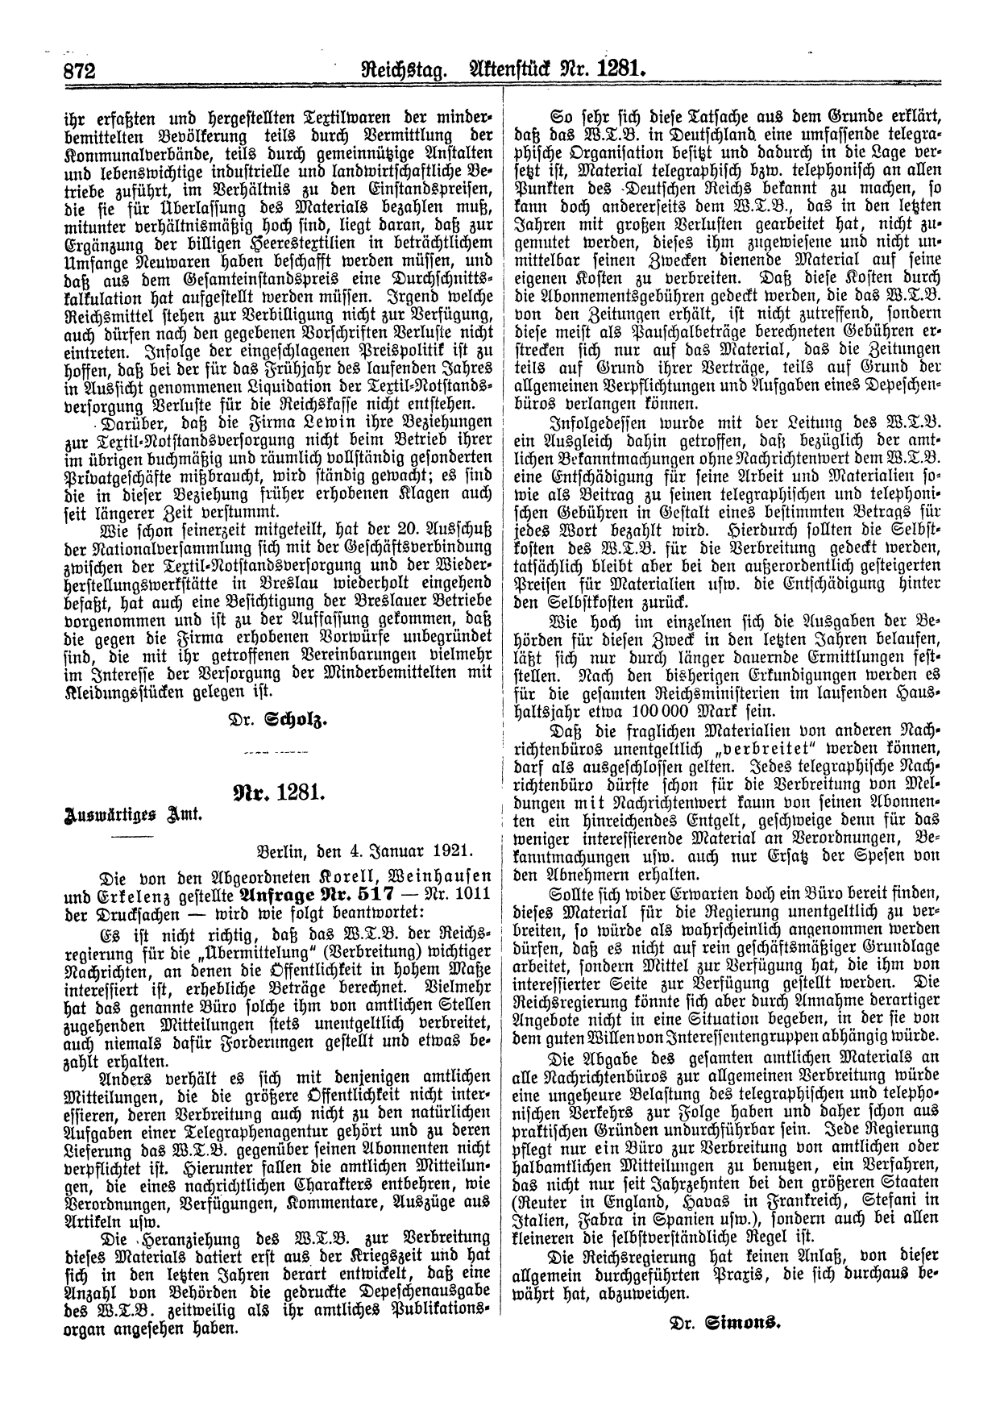 Scan of page 872